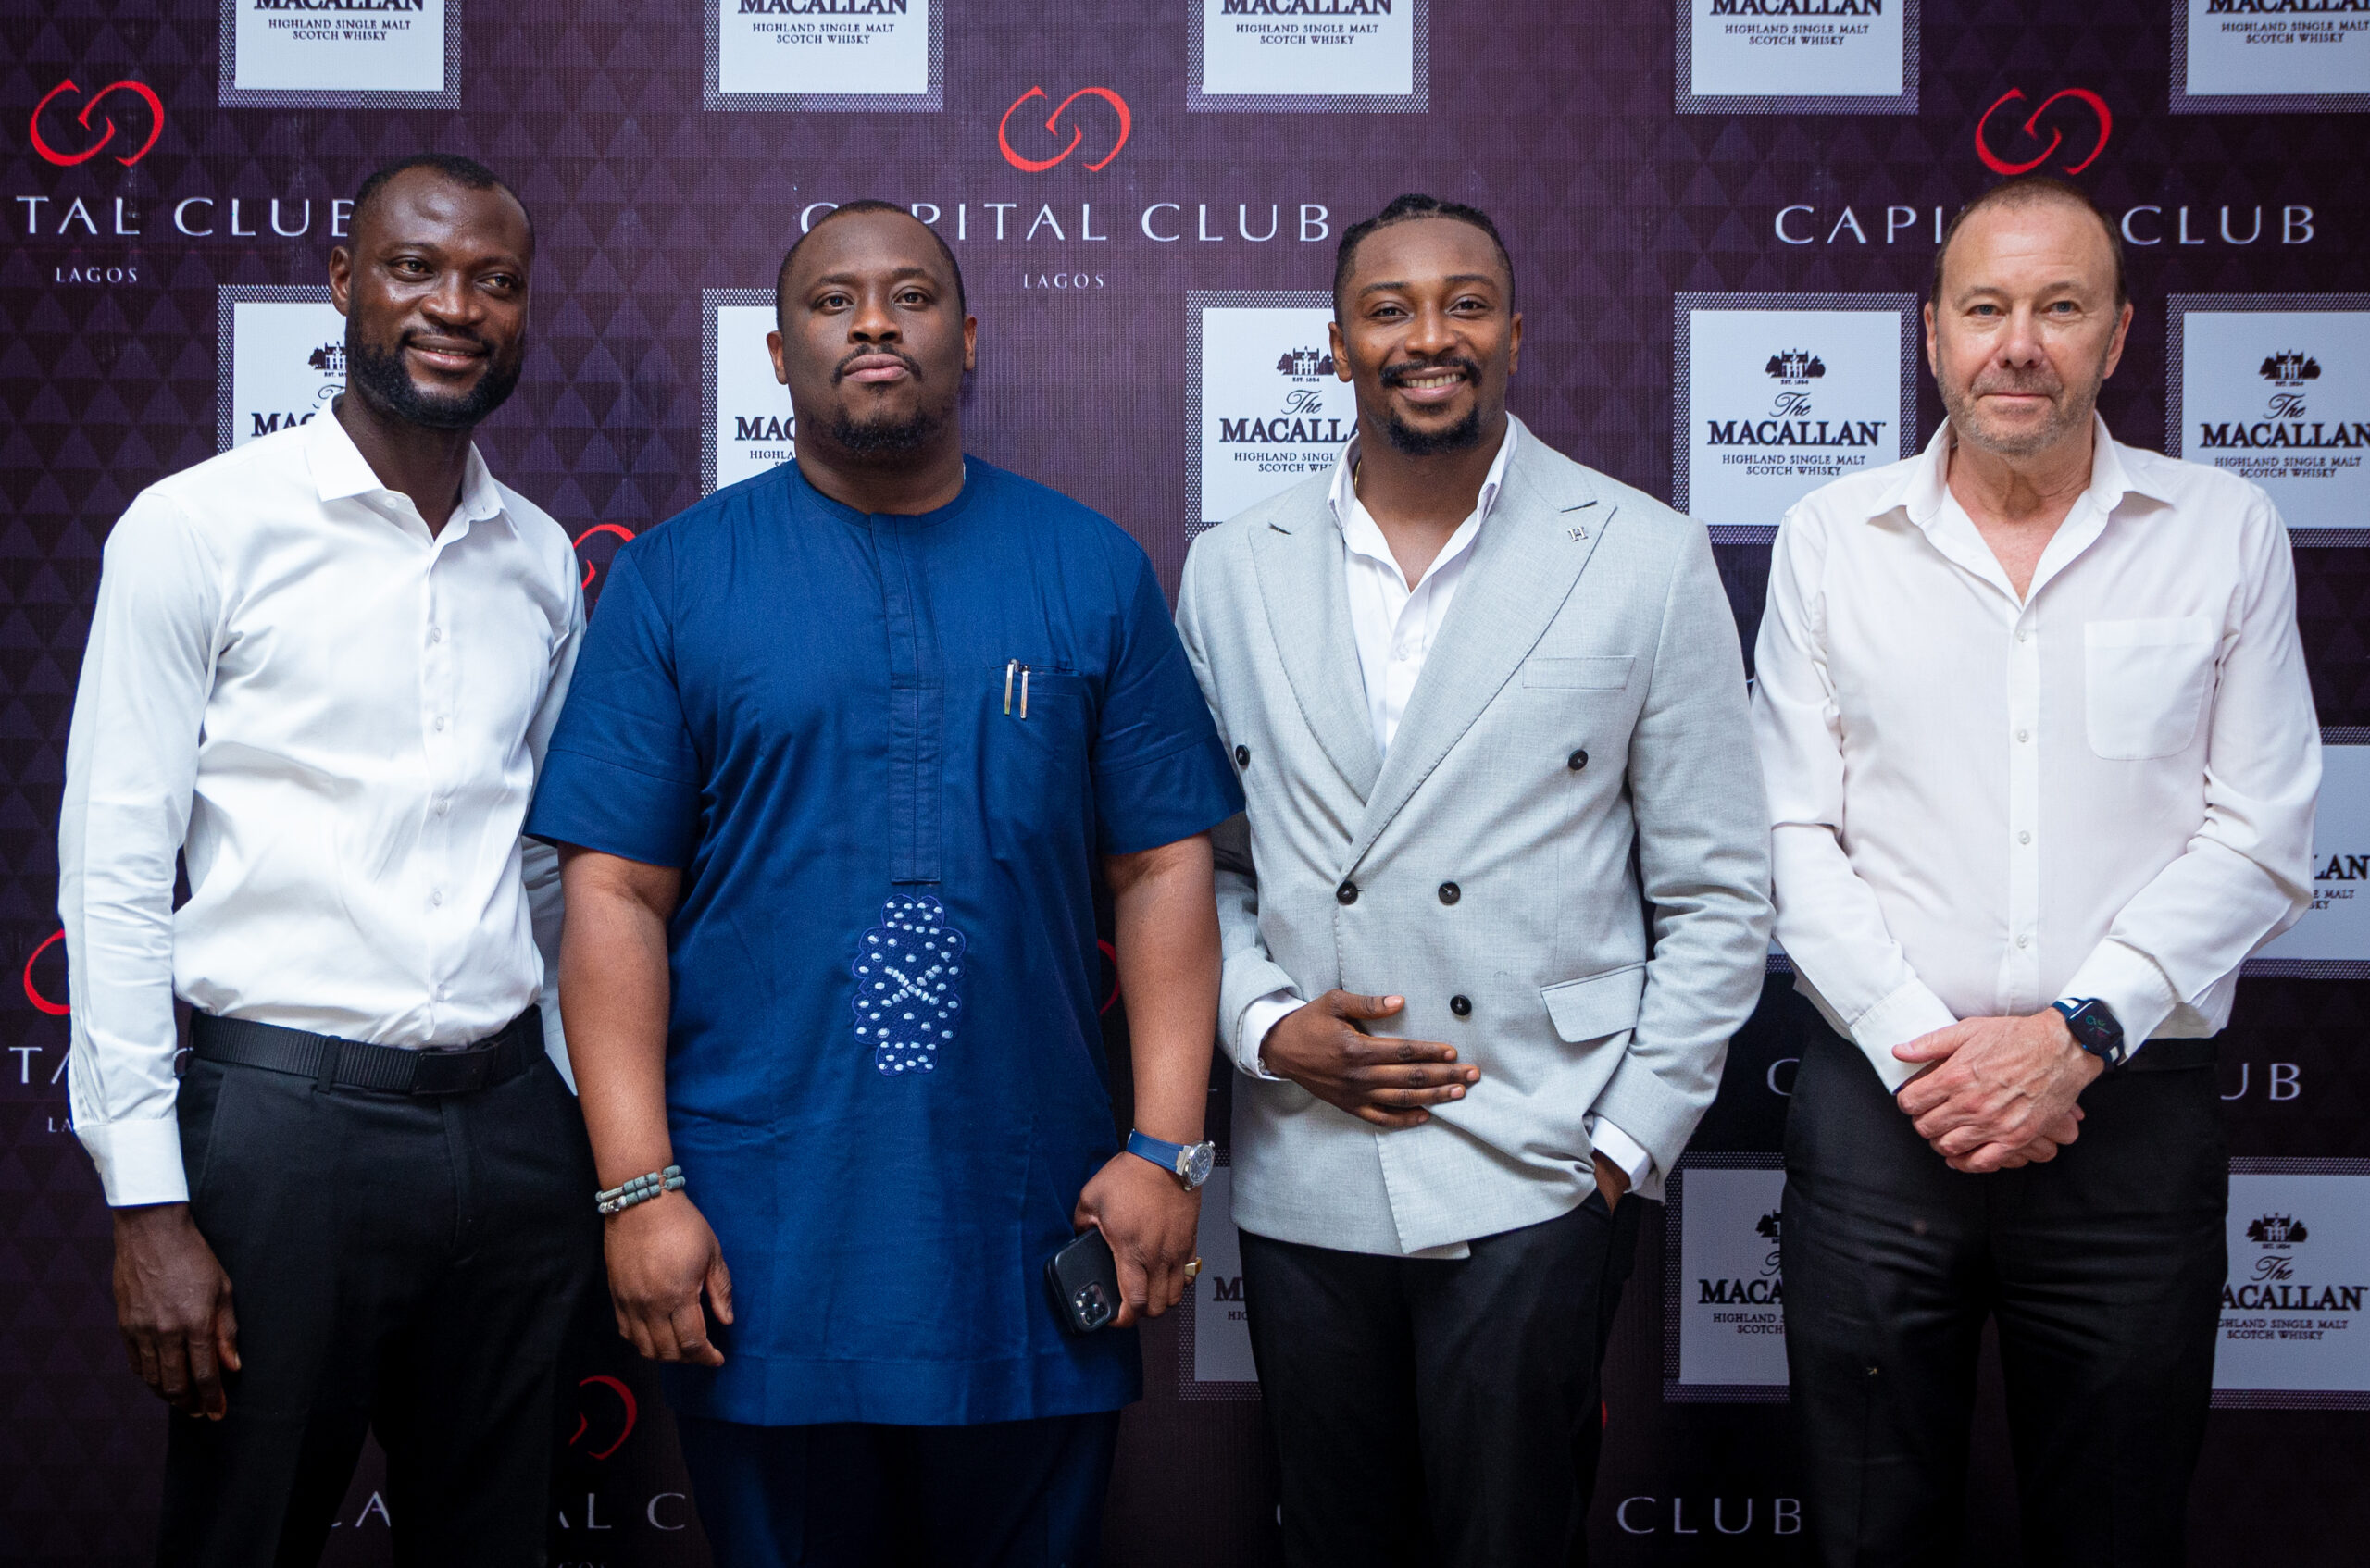 The Macallan Hosts Exclusive Whisky Soirée At Capital Club Lagos